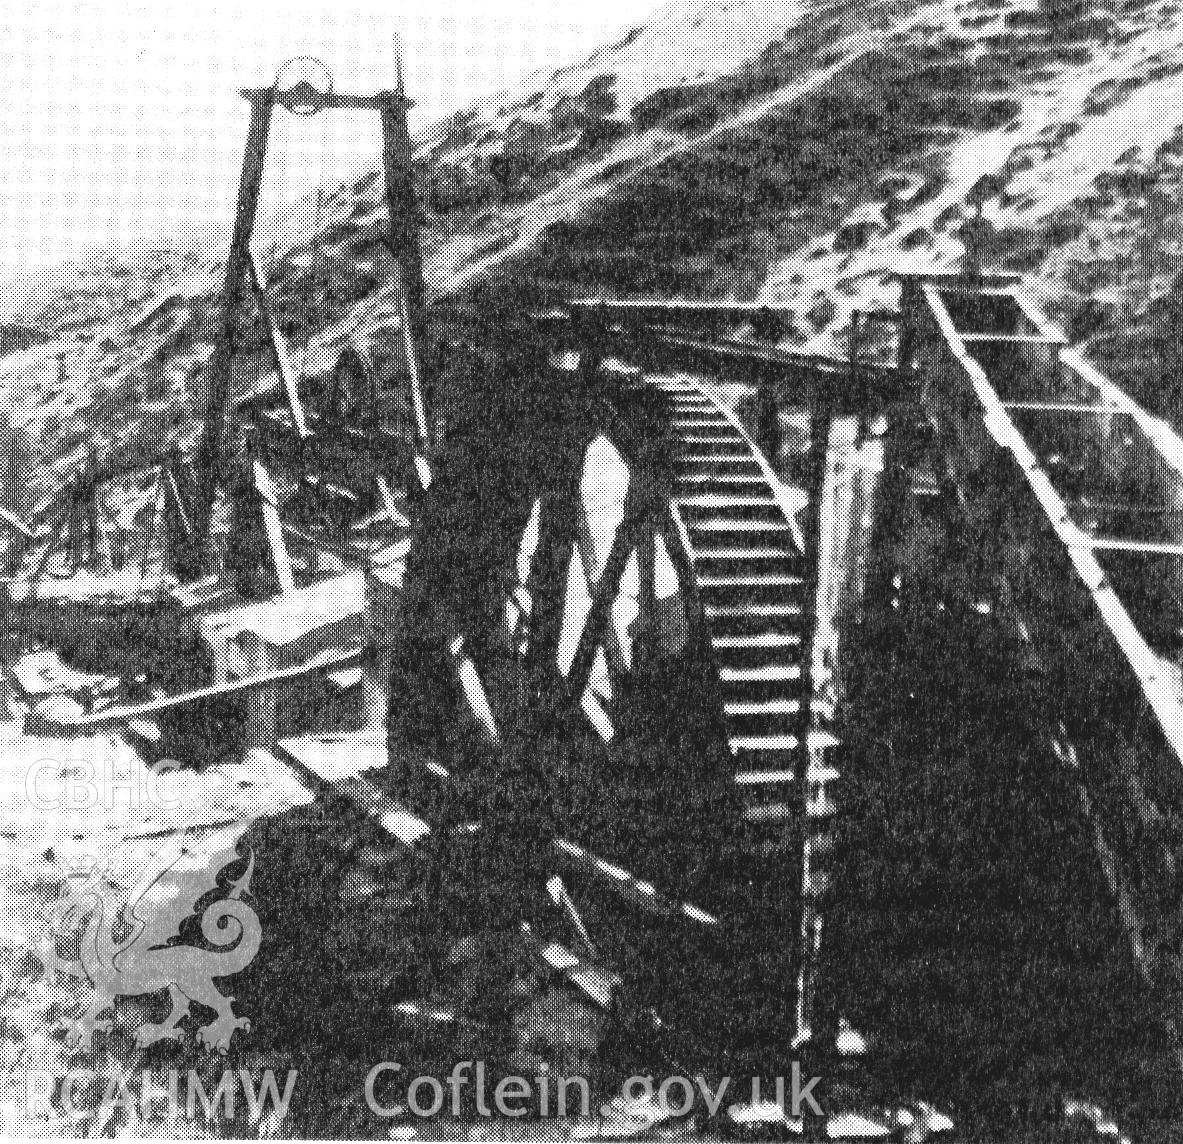 Black and white photograph showing mining machinery at Nant Iago.